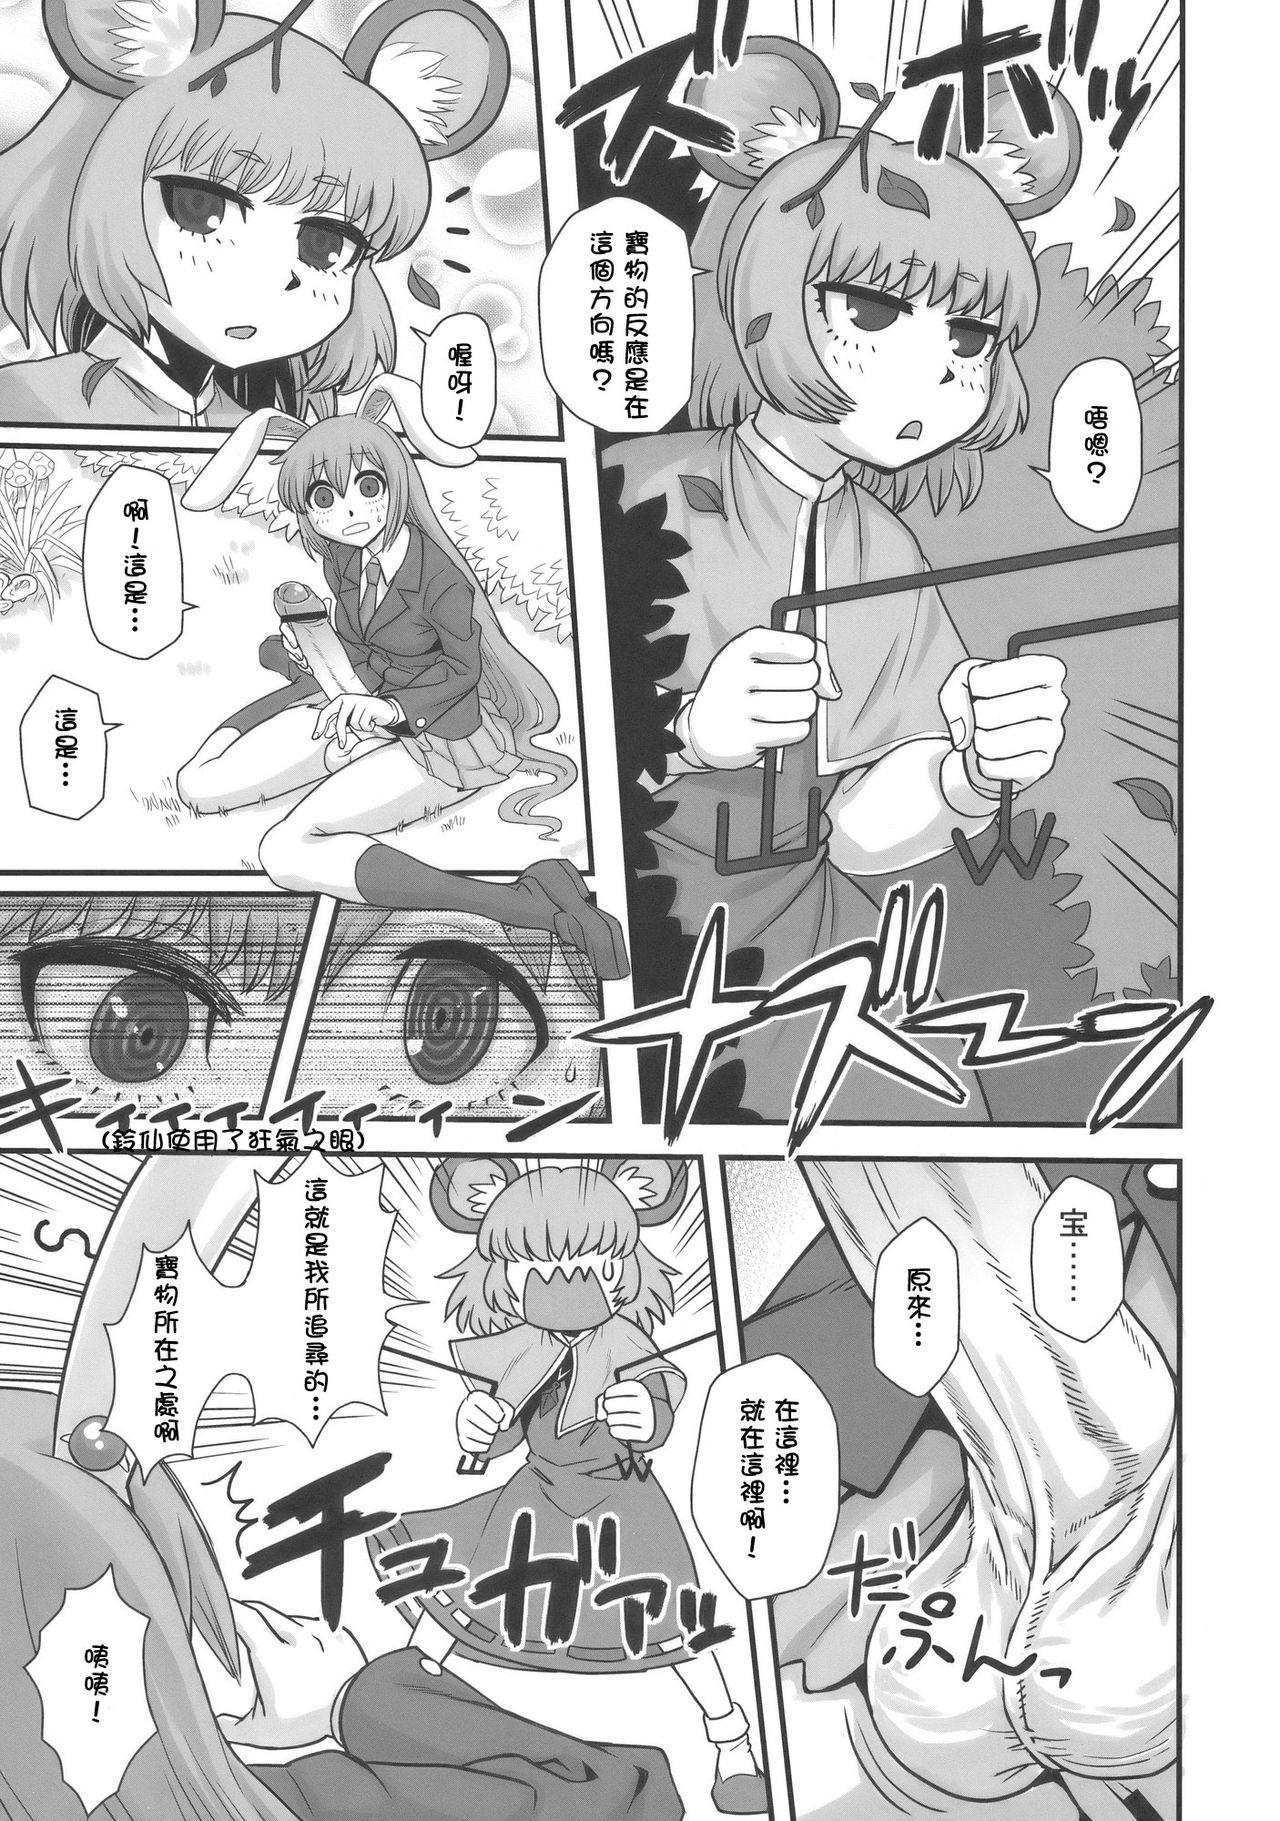 Behind Lunatic Udon - Touhou project Gay Skinny - Page 5